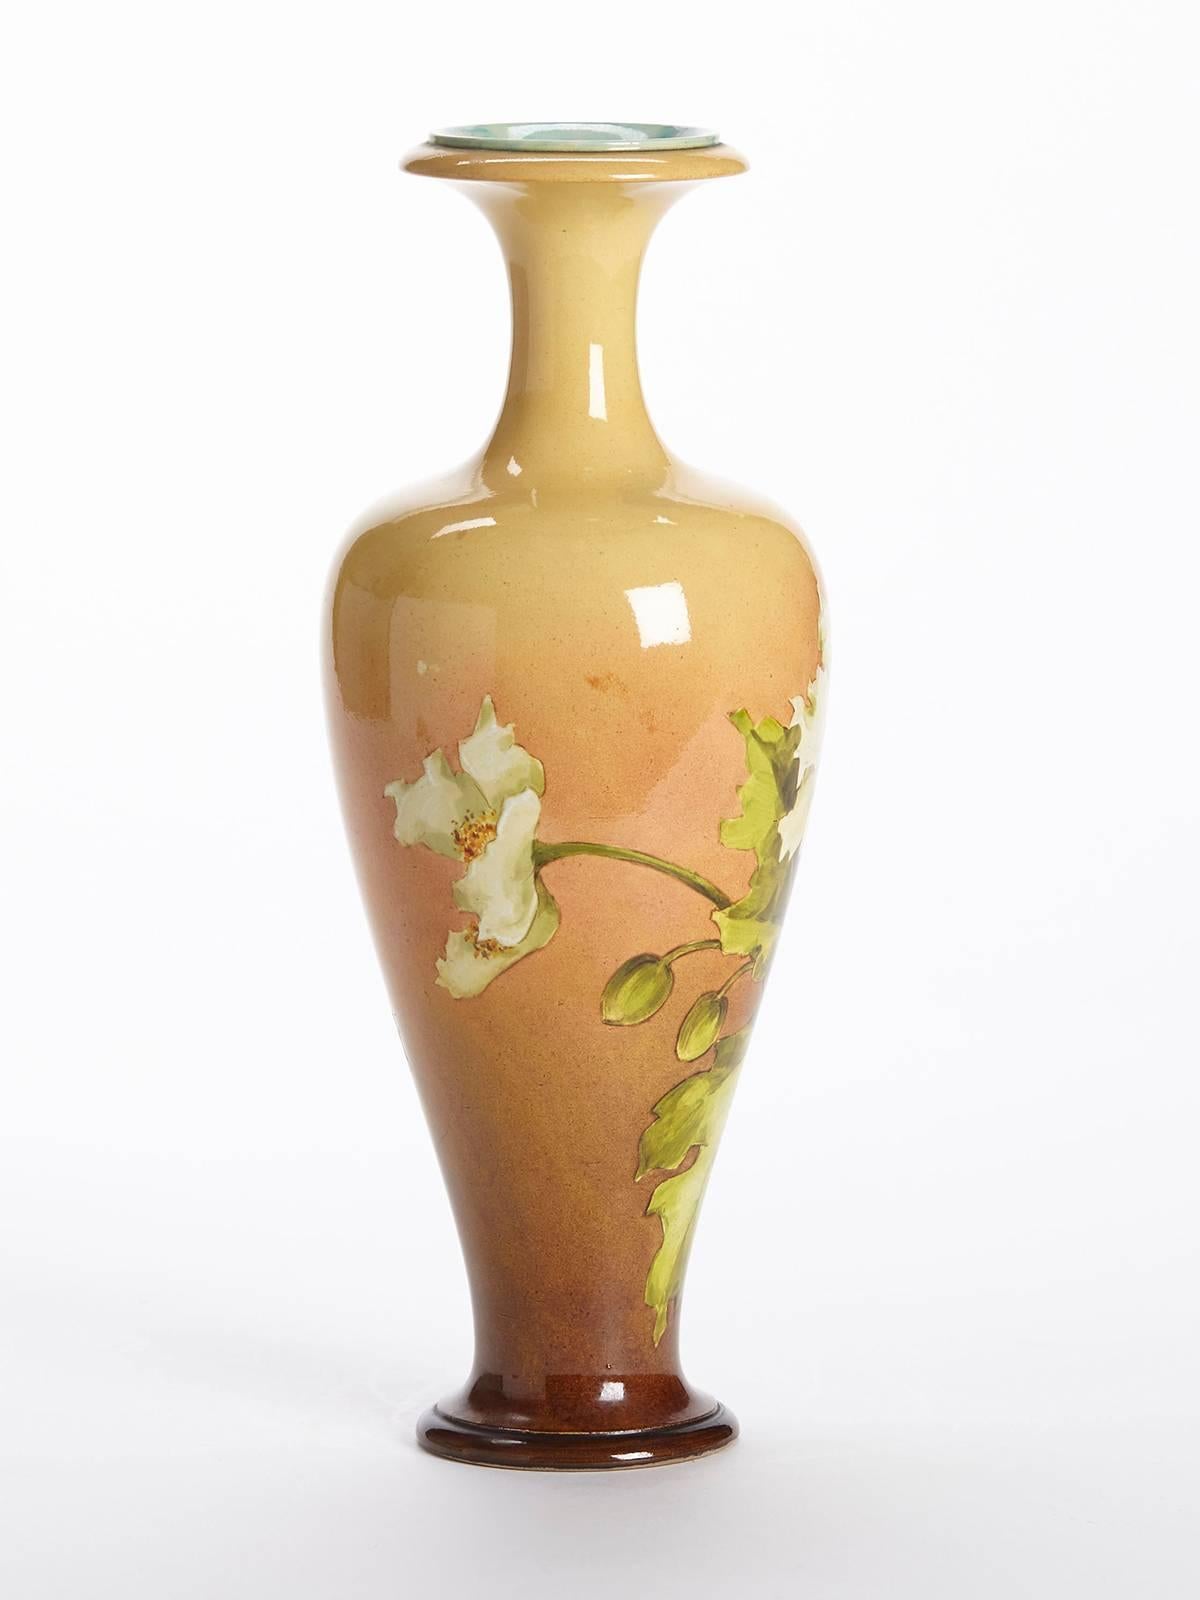 Originating from an extensive private art pottery collection we offer this elegantly shaped antique Doulton Lambeth Faience vase hand decorated with floral designs and dating from, circa 1880. Indistinctly signed this tall stoneware vase stands on a